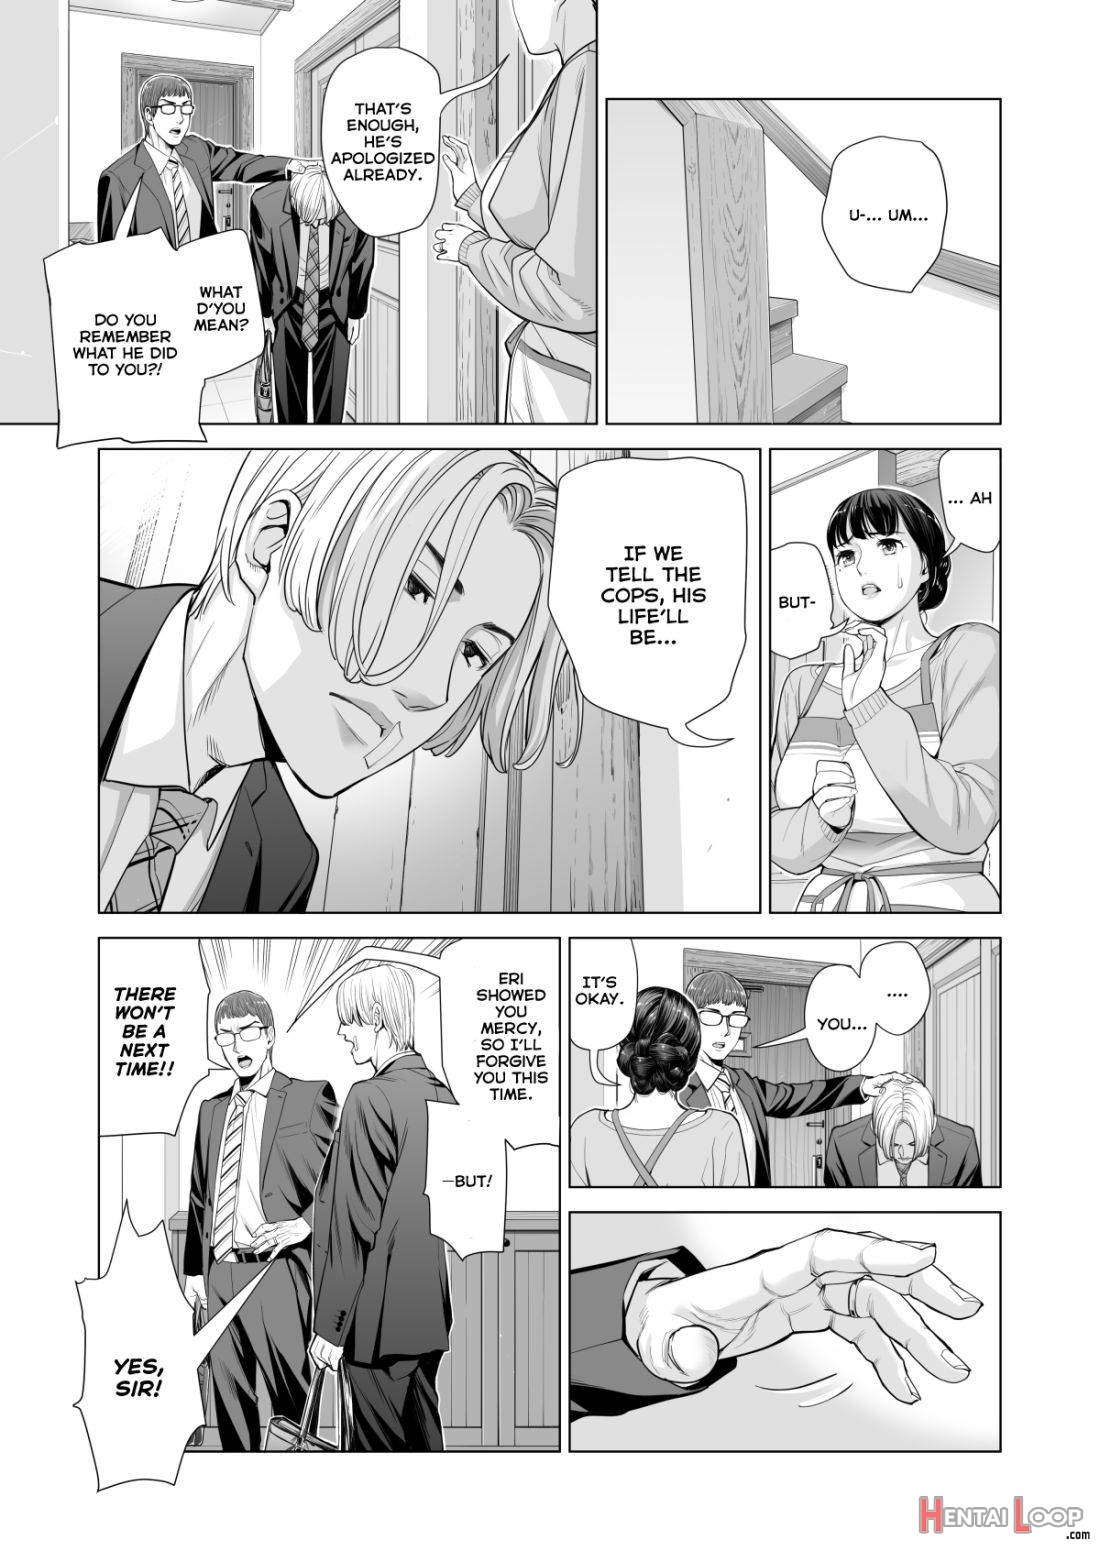 Tsukiyo no Midare Zake (Kouhen) Moonlit Intoxication ~ A Housewife Stolen by a Coworker Besides her Blackout Drunk Husband ~ Chapter 2 page 27